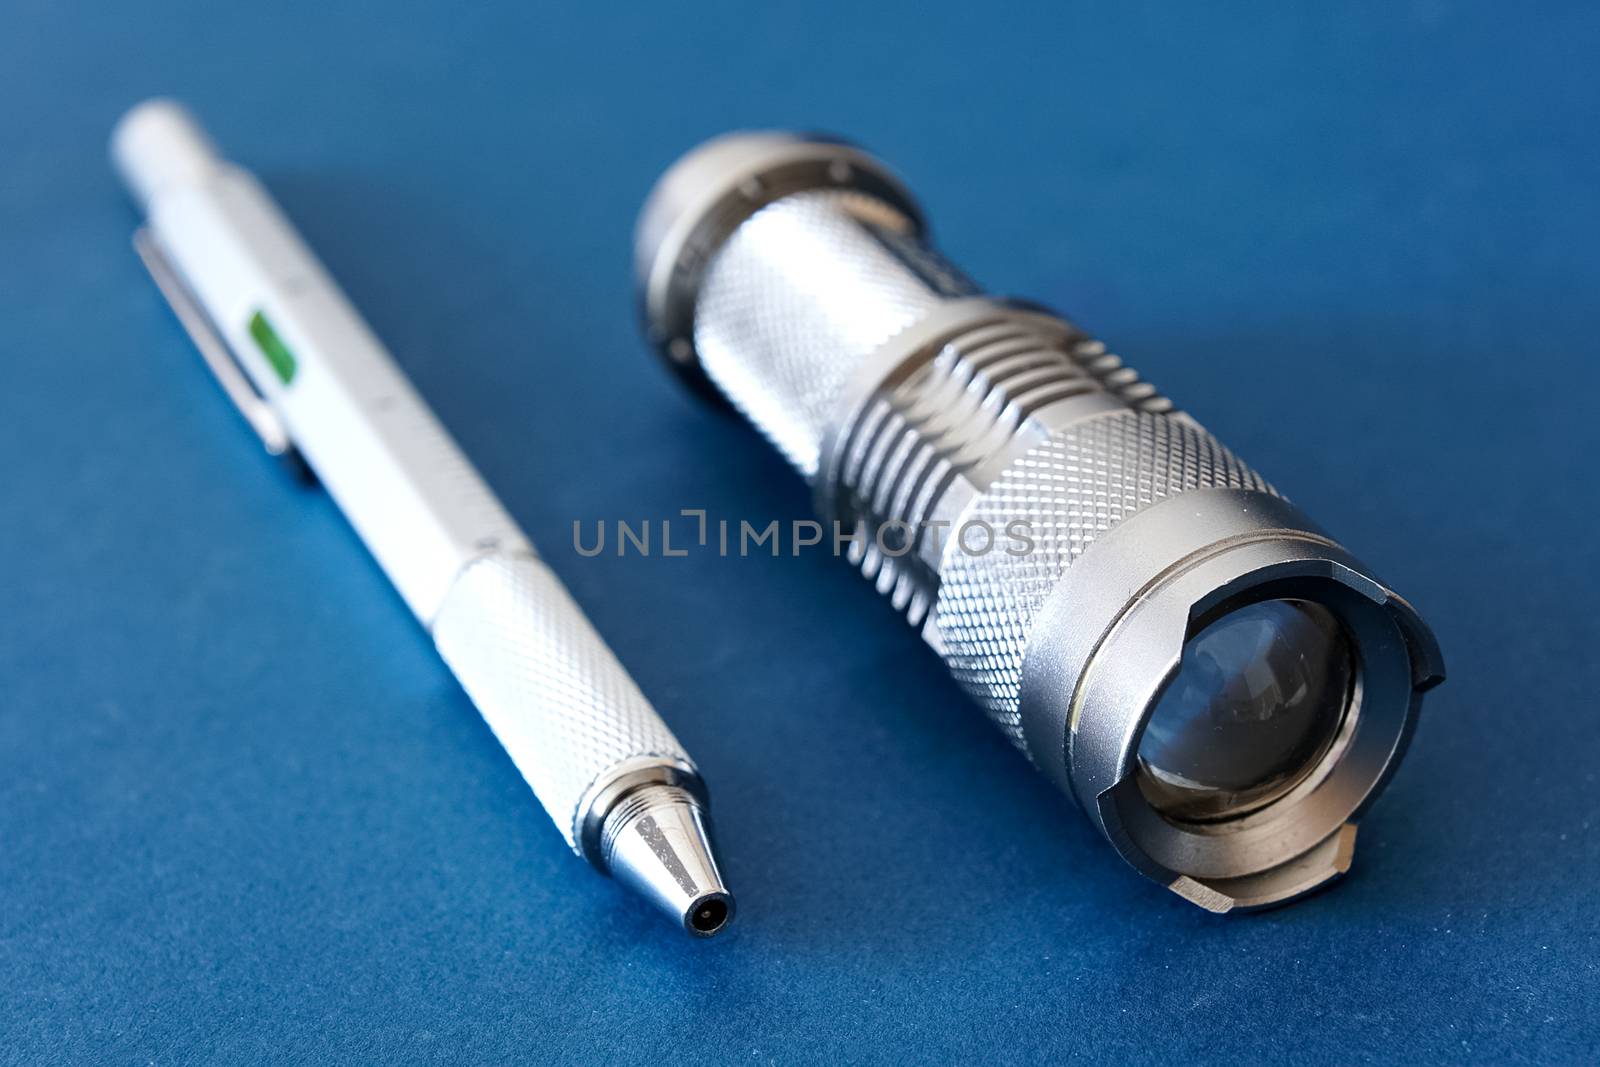 Products from aluminum, a flashlight and a writing pen by nyrok